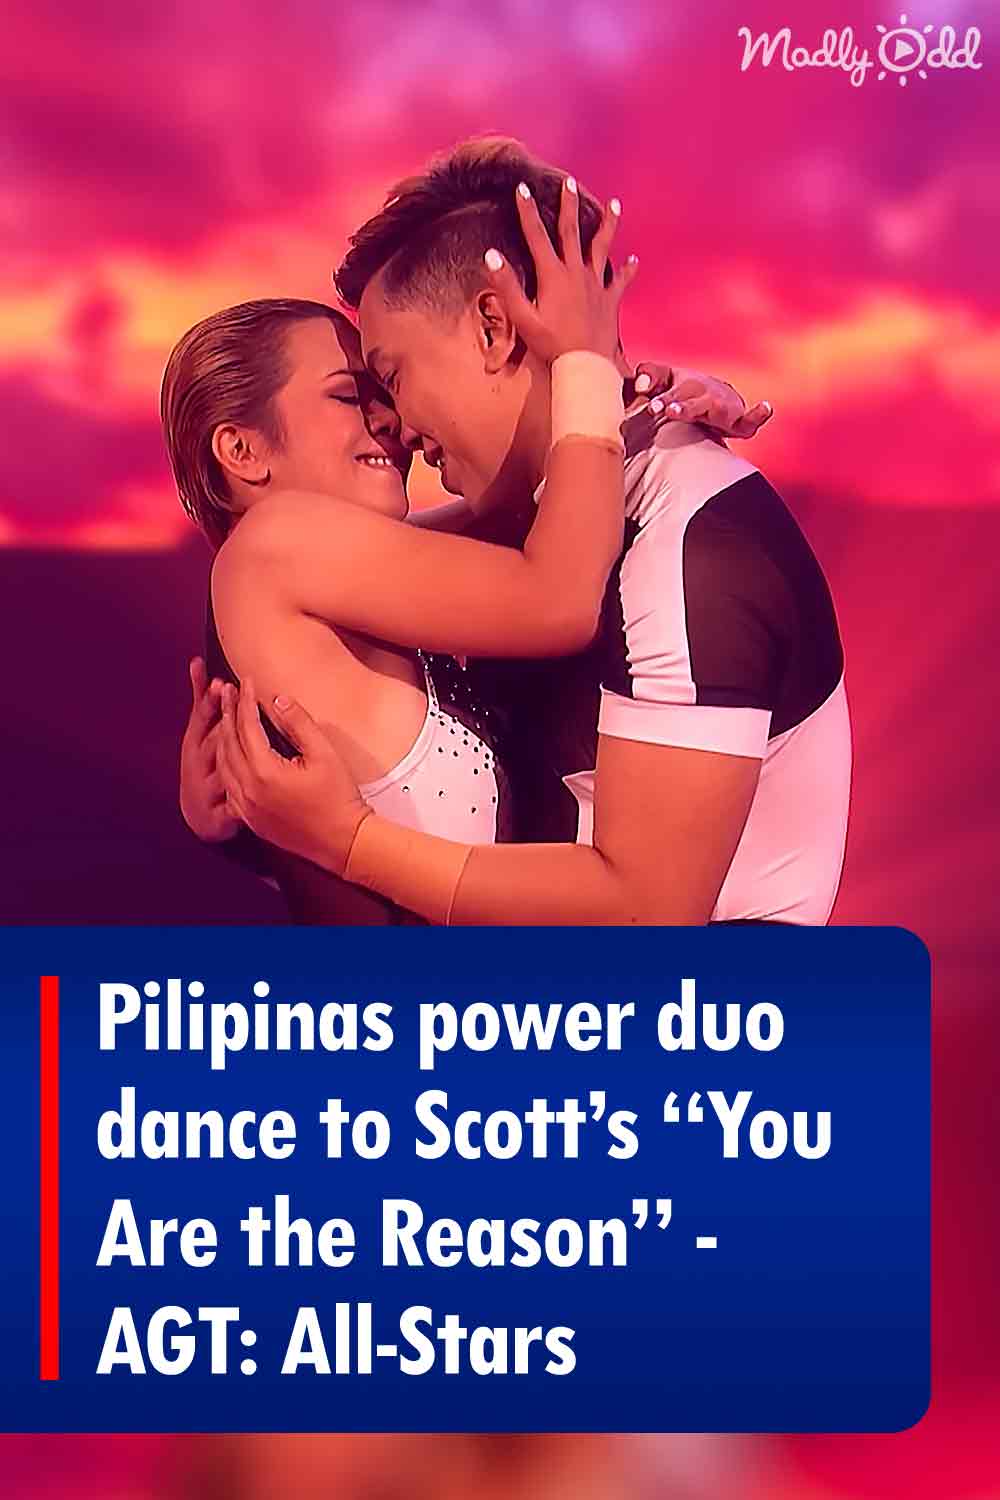 Pilipinas power duo dance to Scott’s “You Are the Reason” - AGT: All-Stars